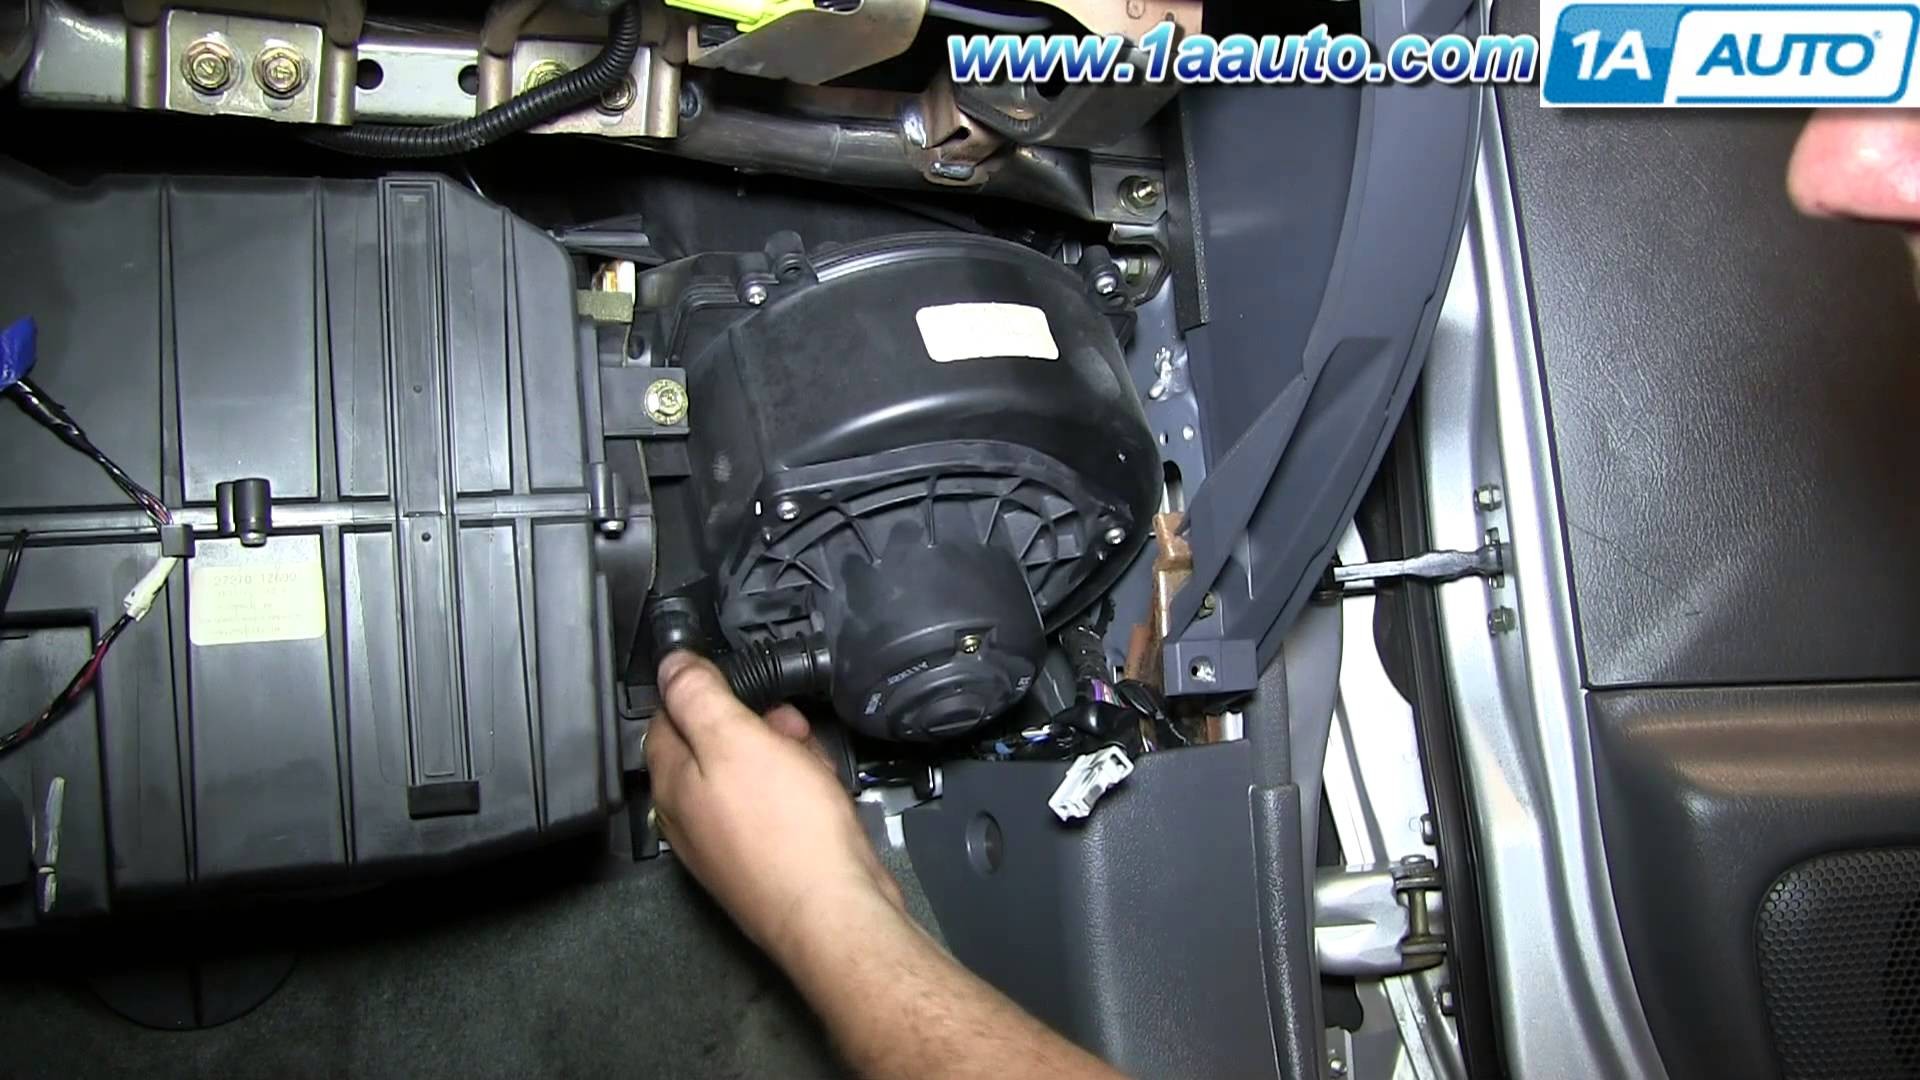 Nissan Versa Engine Diagram How to Install Replace Ac Heater Blower Fan Motor 2000 04 Nissan Of Nissan Versa Engine Diagram